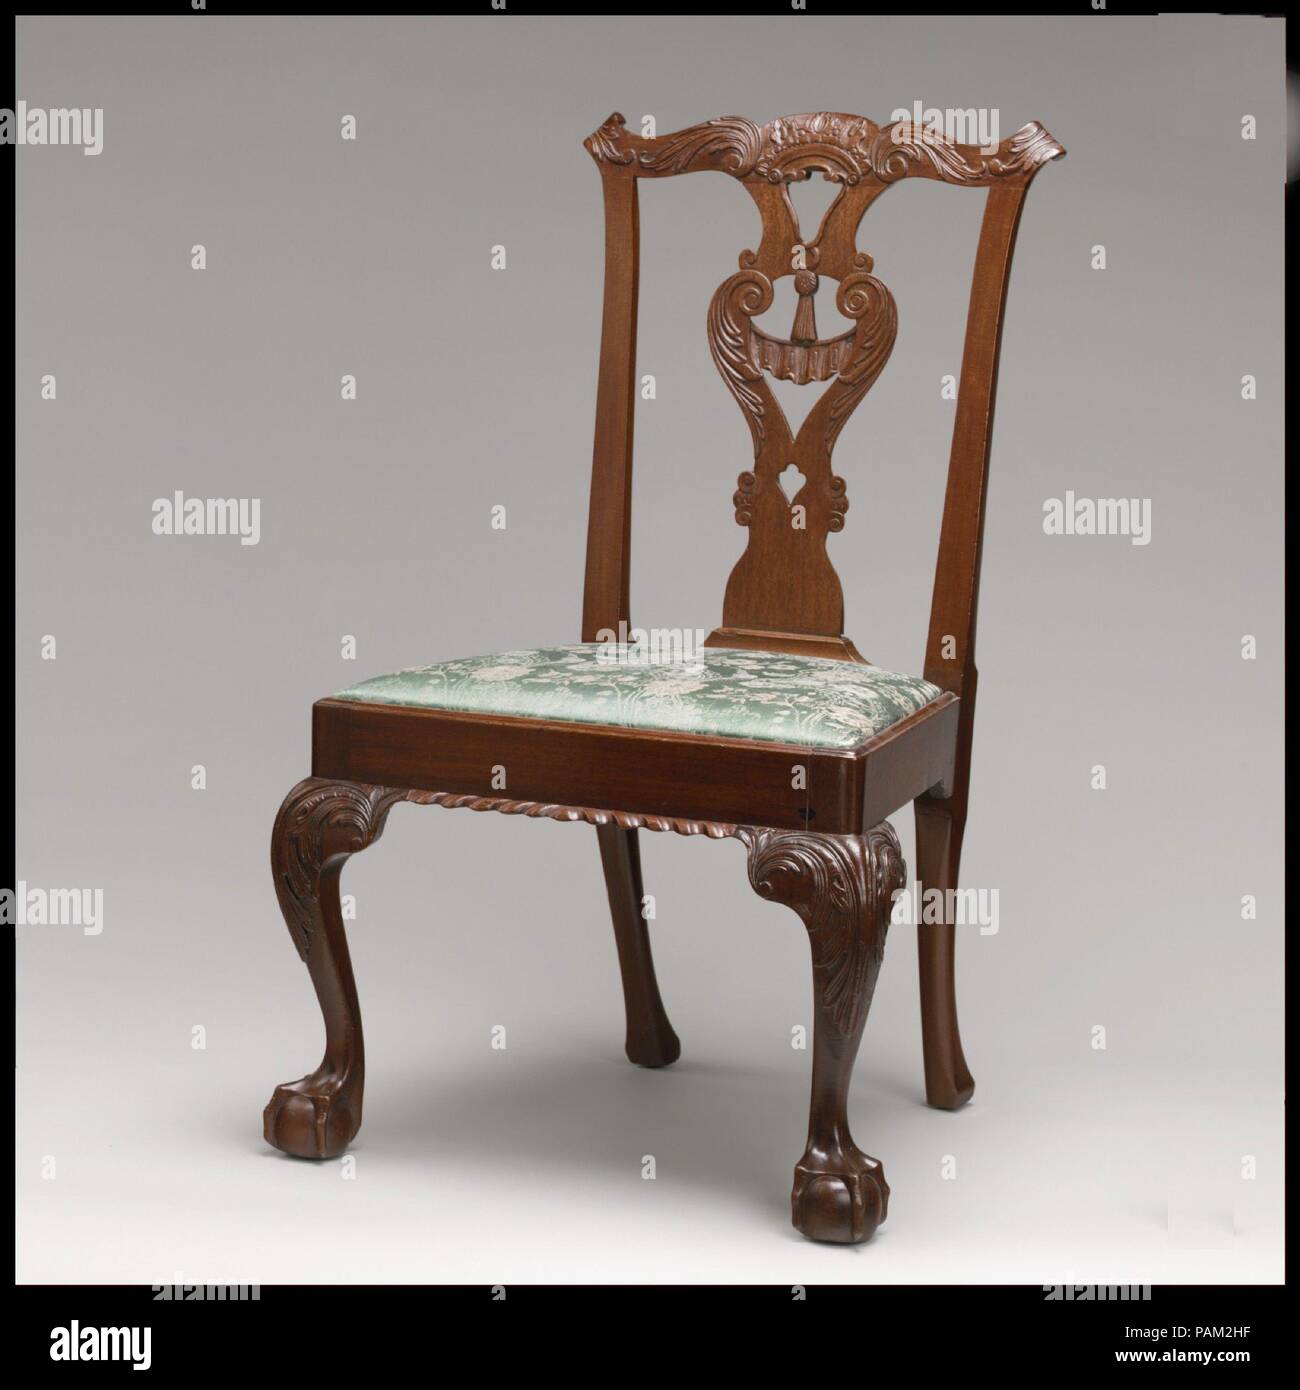 Side Chair. Culture: American. Dimensions: 38 7/8 x 24 1/4 x 22 1/4 in. (98.7 x 61.6 x 56.5 cm). Date: 1765-75.  Typical New York features, such as the carved tassel-and-ruffle design in the splat, the gadrooned seat rail, and the square claw-and-ball feet, are displayed in this chair. It is thought to have descended in the great landholding Van Rensselaer family of Albany, New York. Museum: Metropolitan Museum of Art, New York, USA. Stock Photo